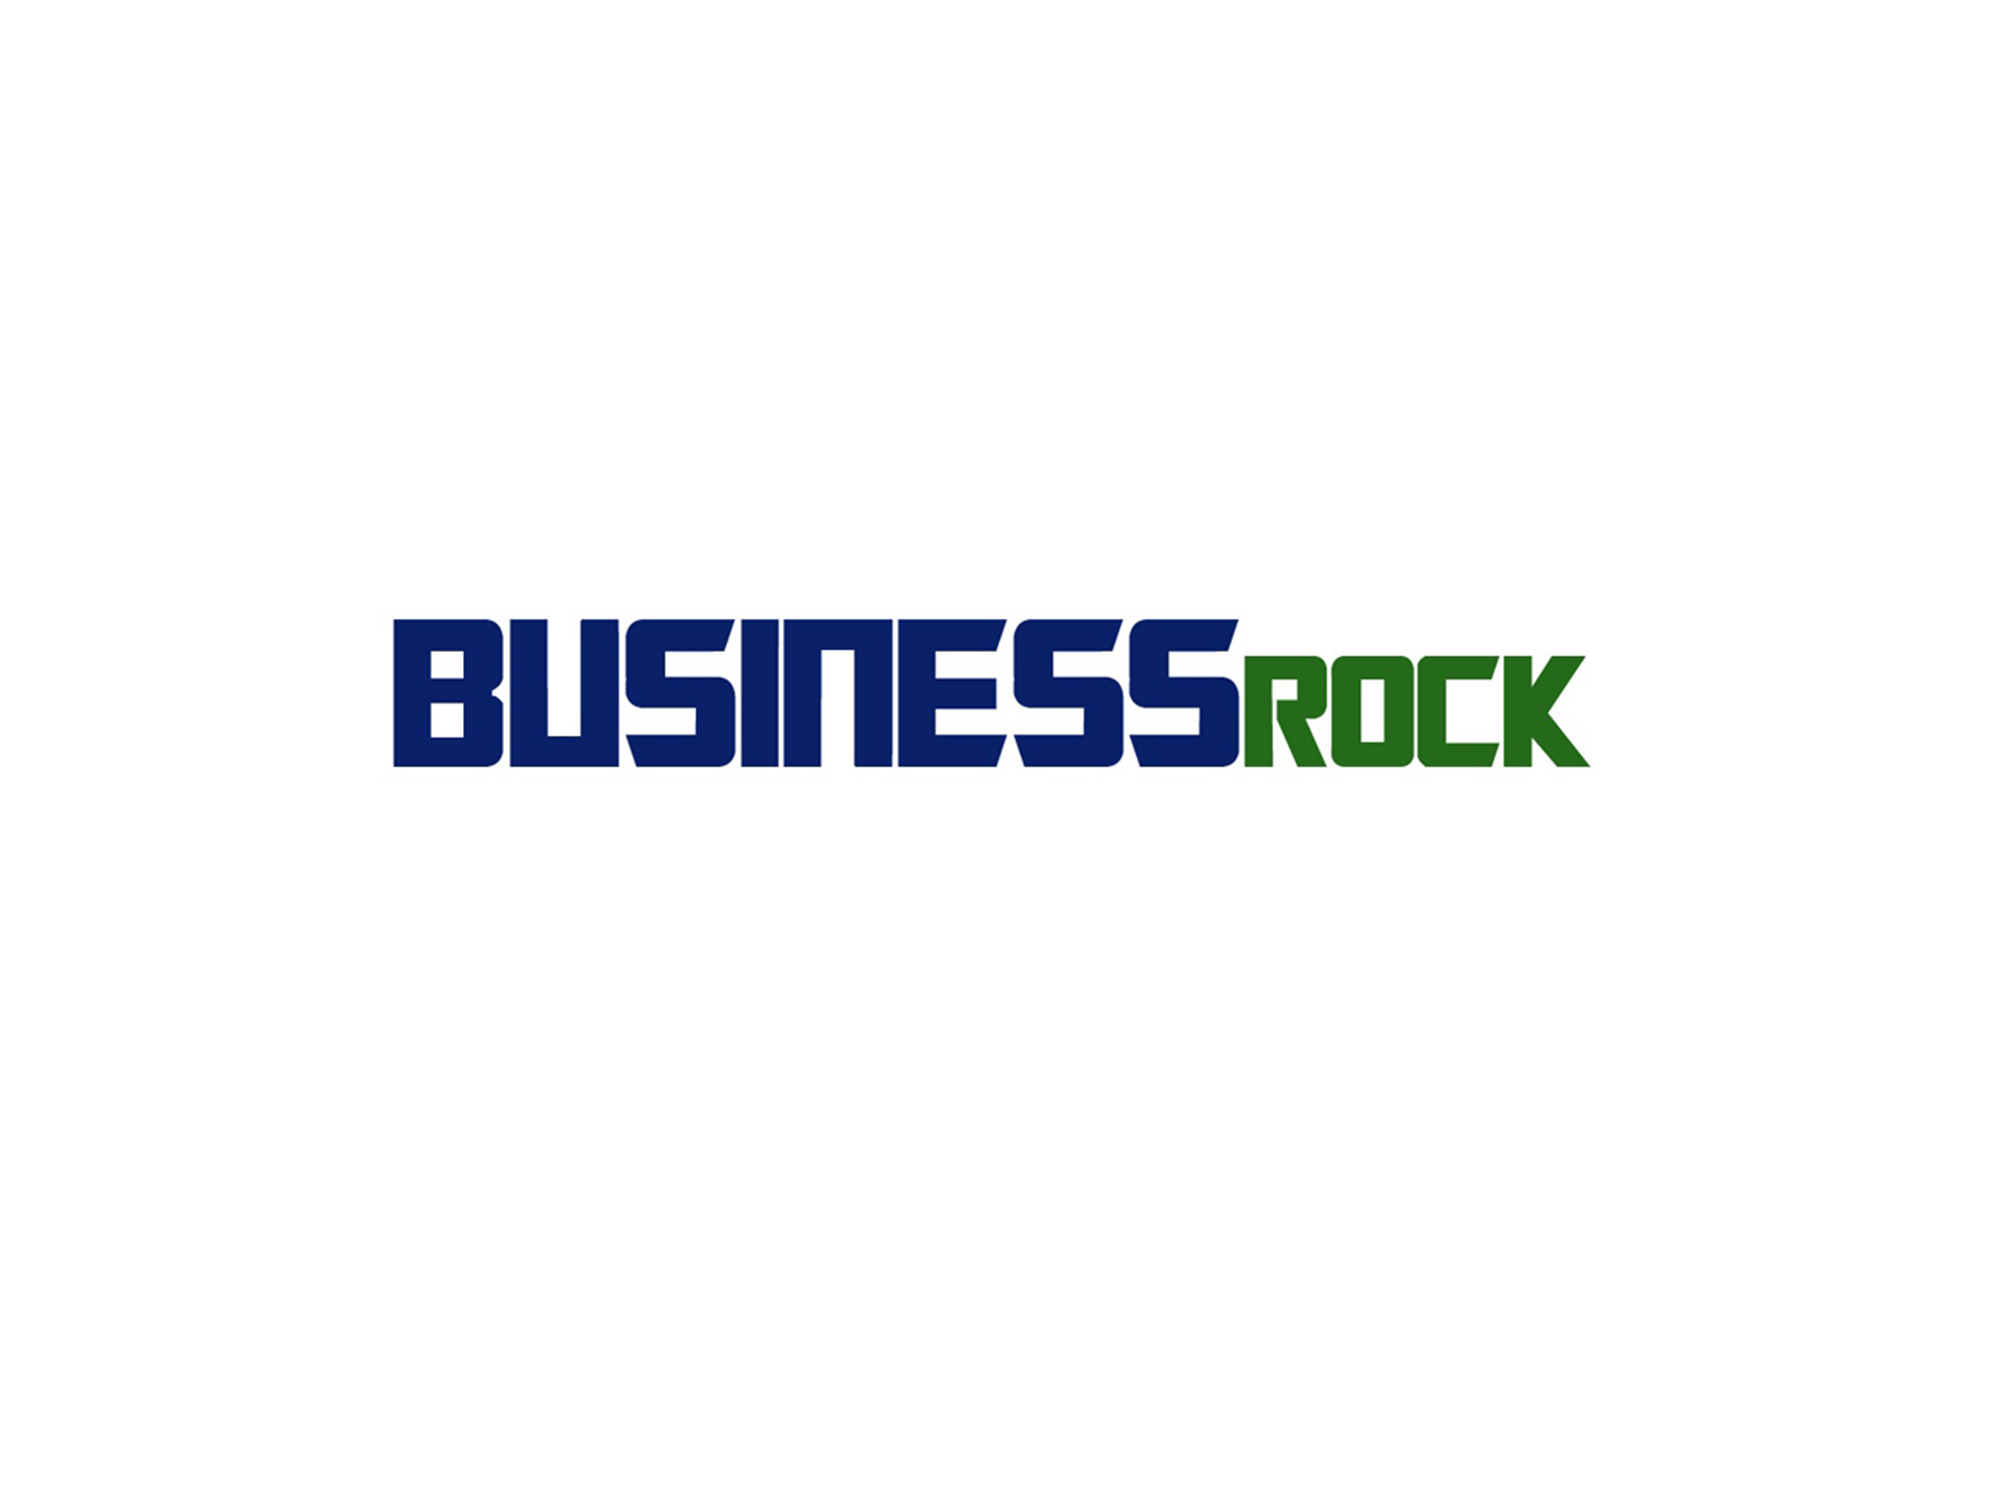 business rock - xpertlab technologies private limited